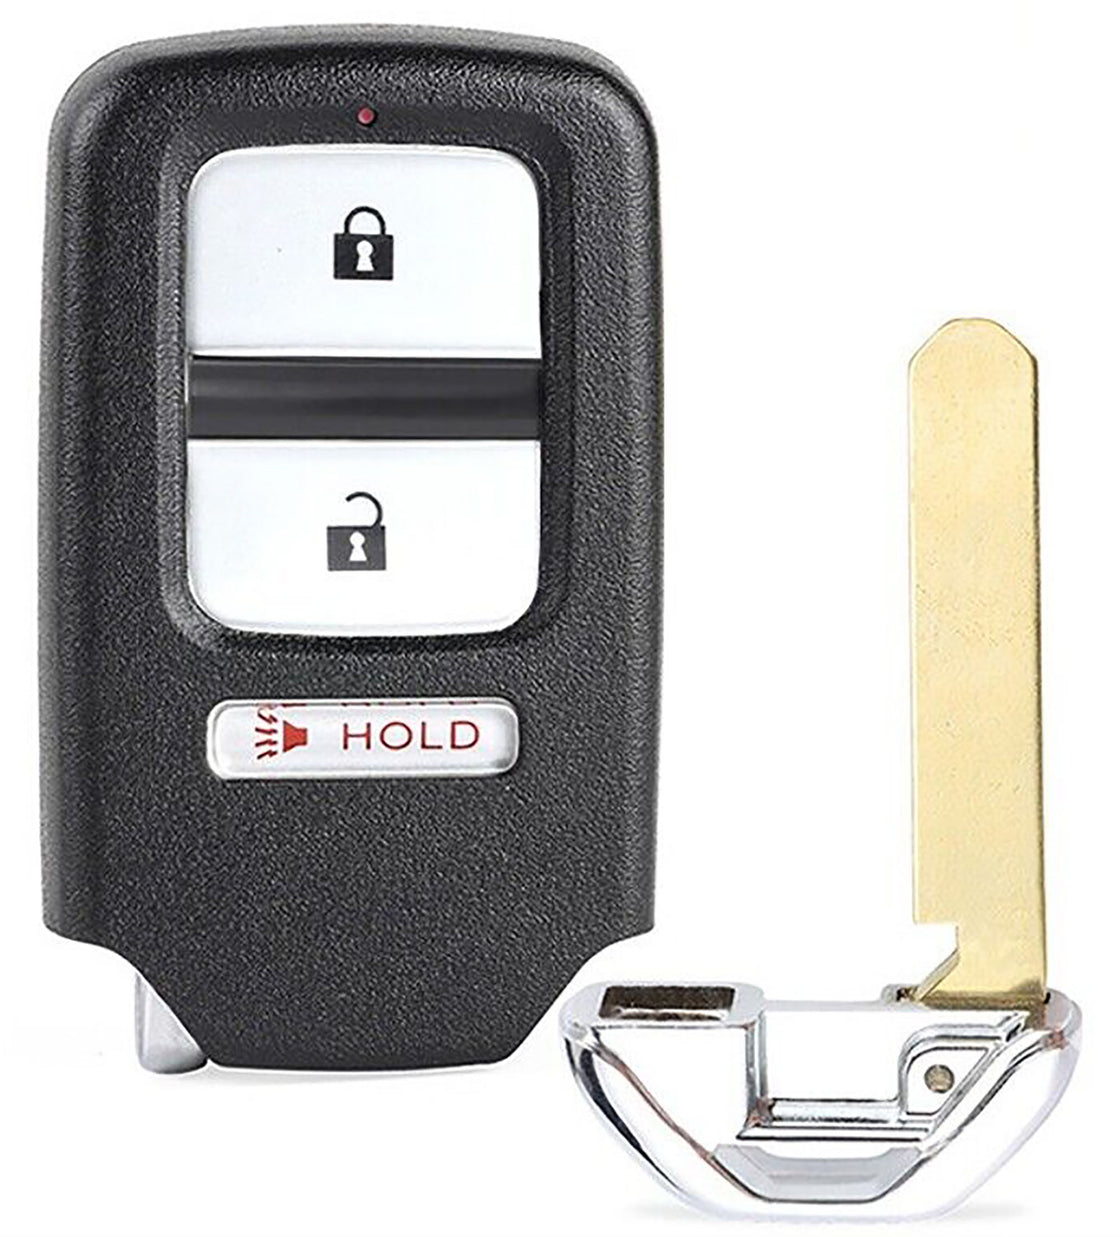 1x New Replacement Proximity Remote Key Fob Compatible with & Fit For 2013-2015 HONDA CROSSTOUR - MPN ACJ932HK1210A-02